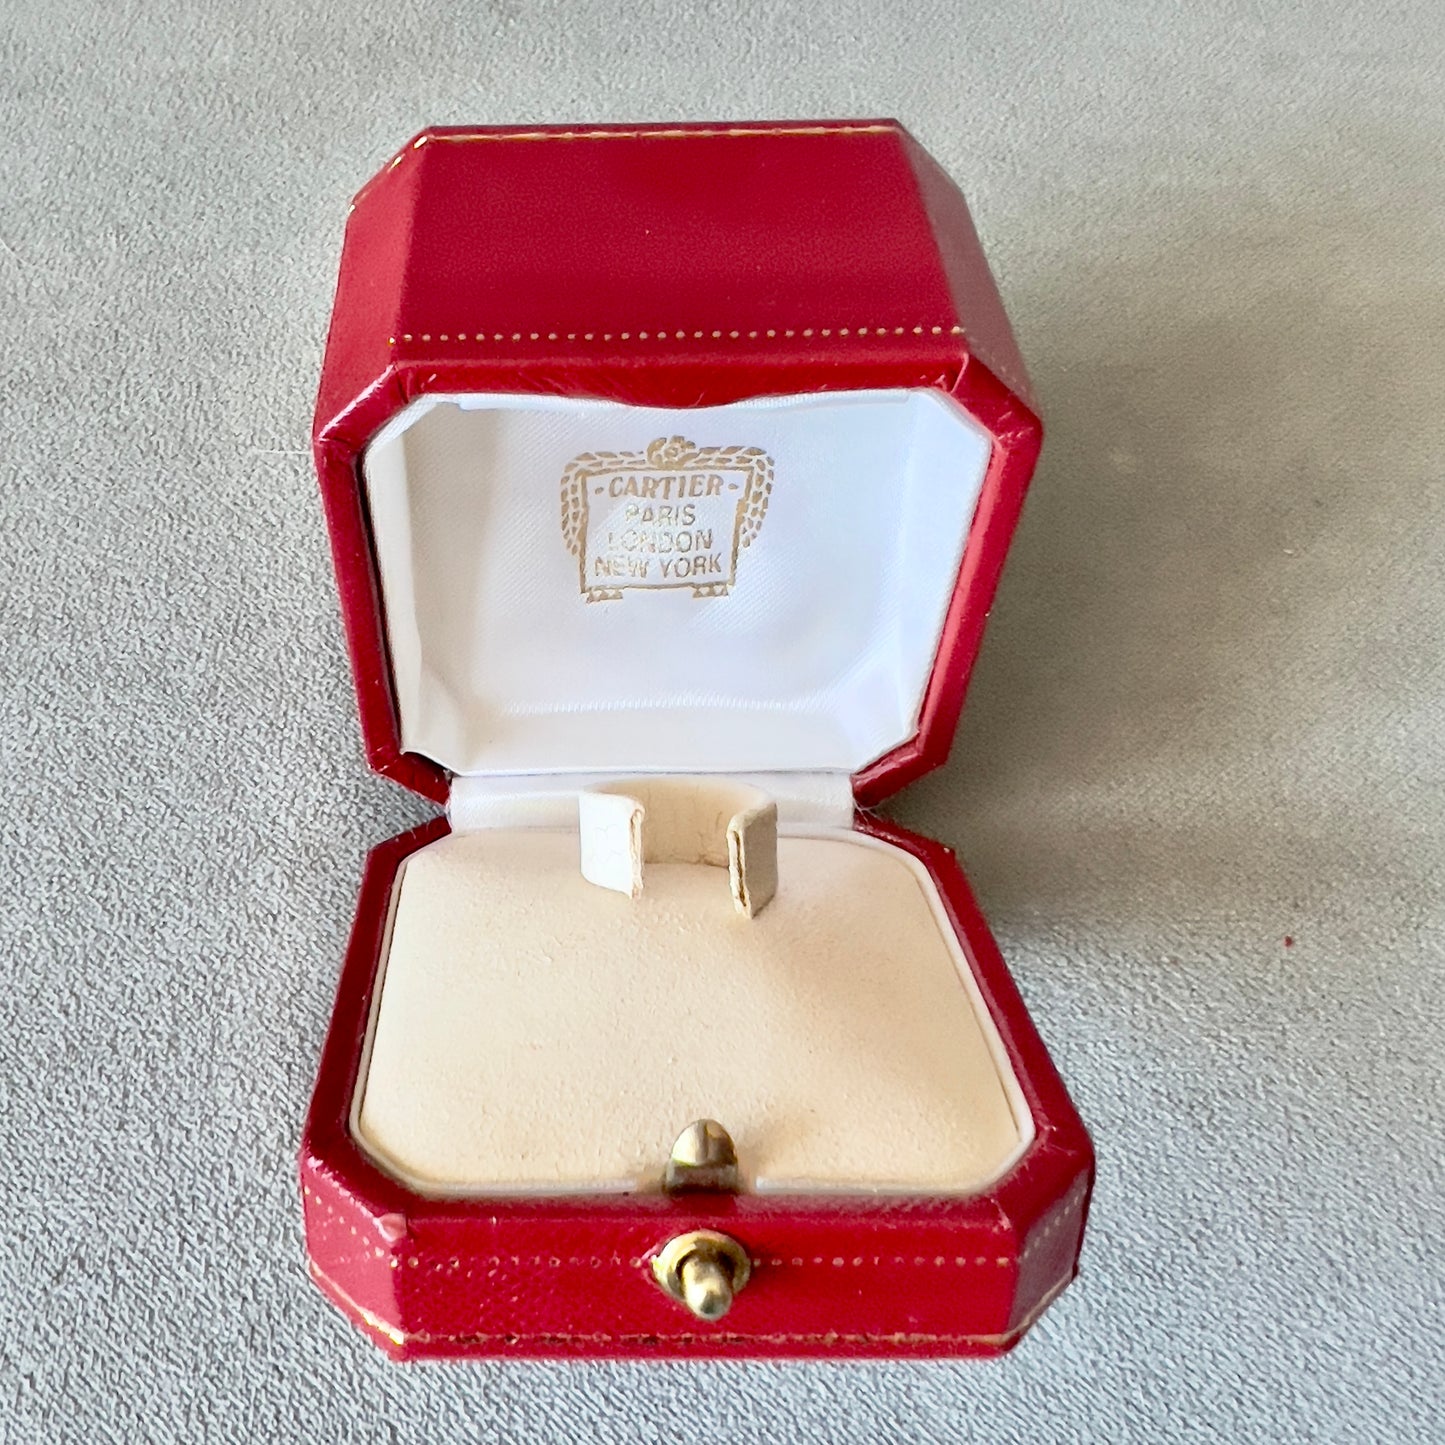 CARTIER Ring Box 2.35x2.35x2 inches